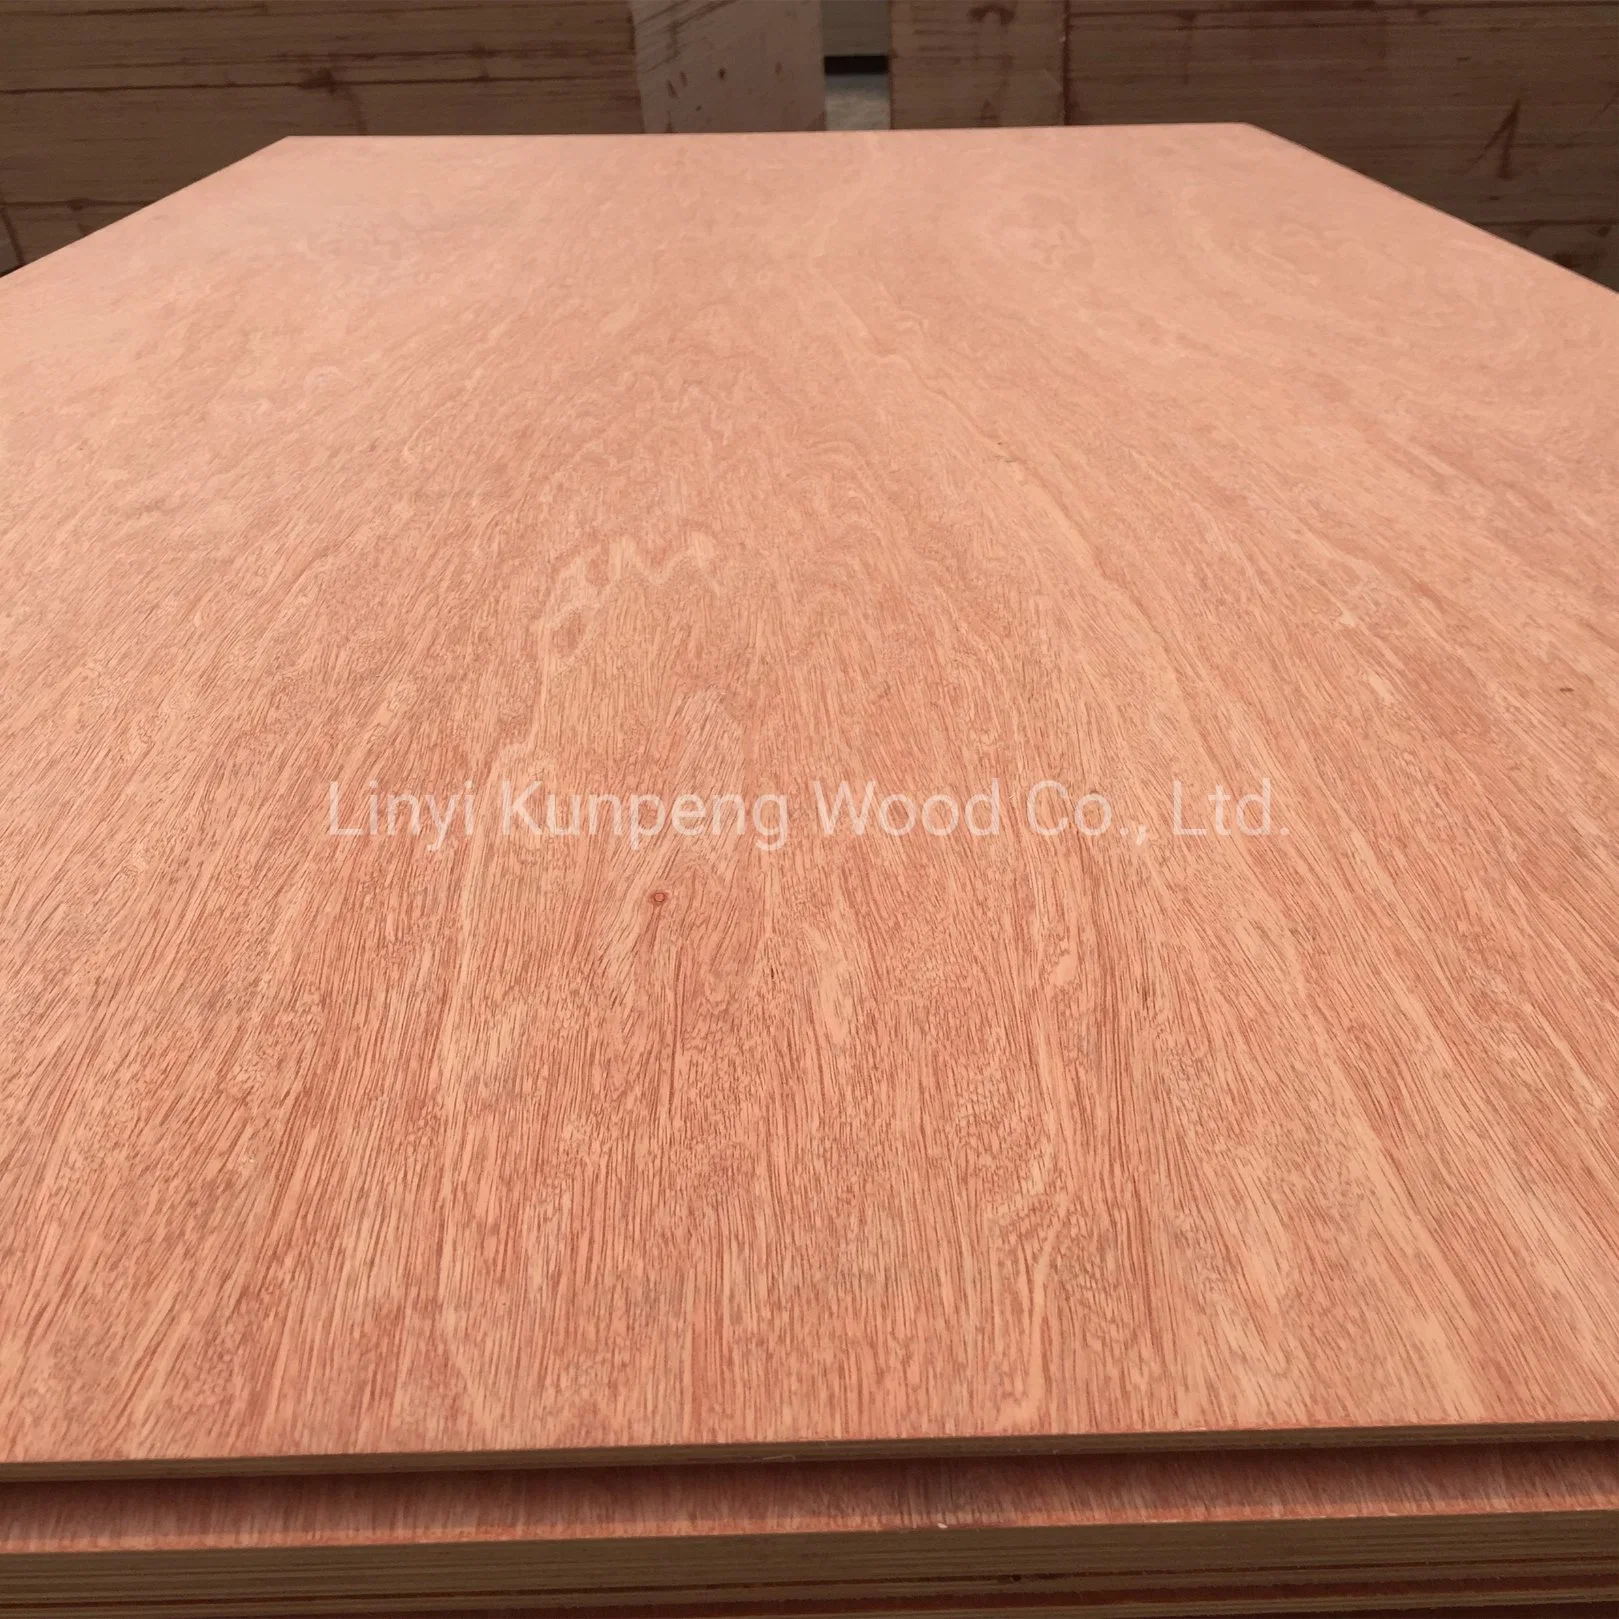 High Quality Commercial Plywood Bintangor/Okoume/Birch/Pine Faced Plywood